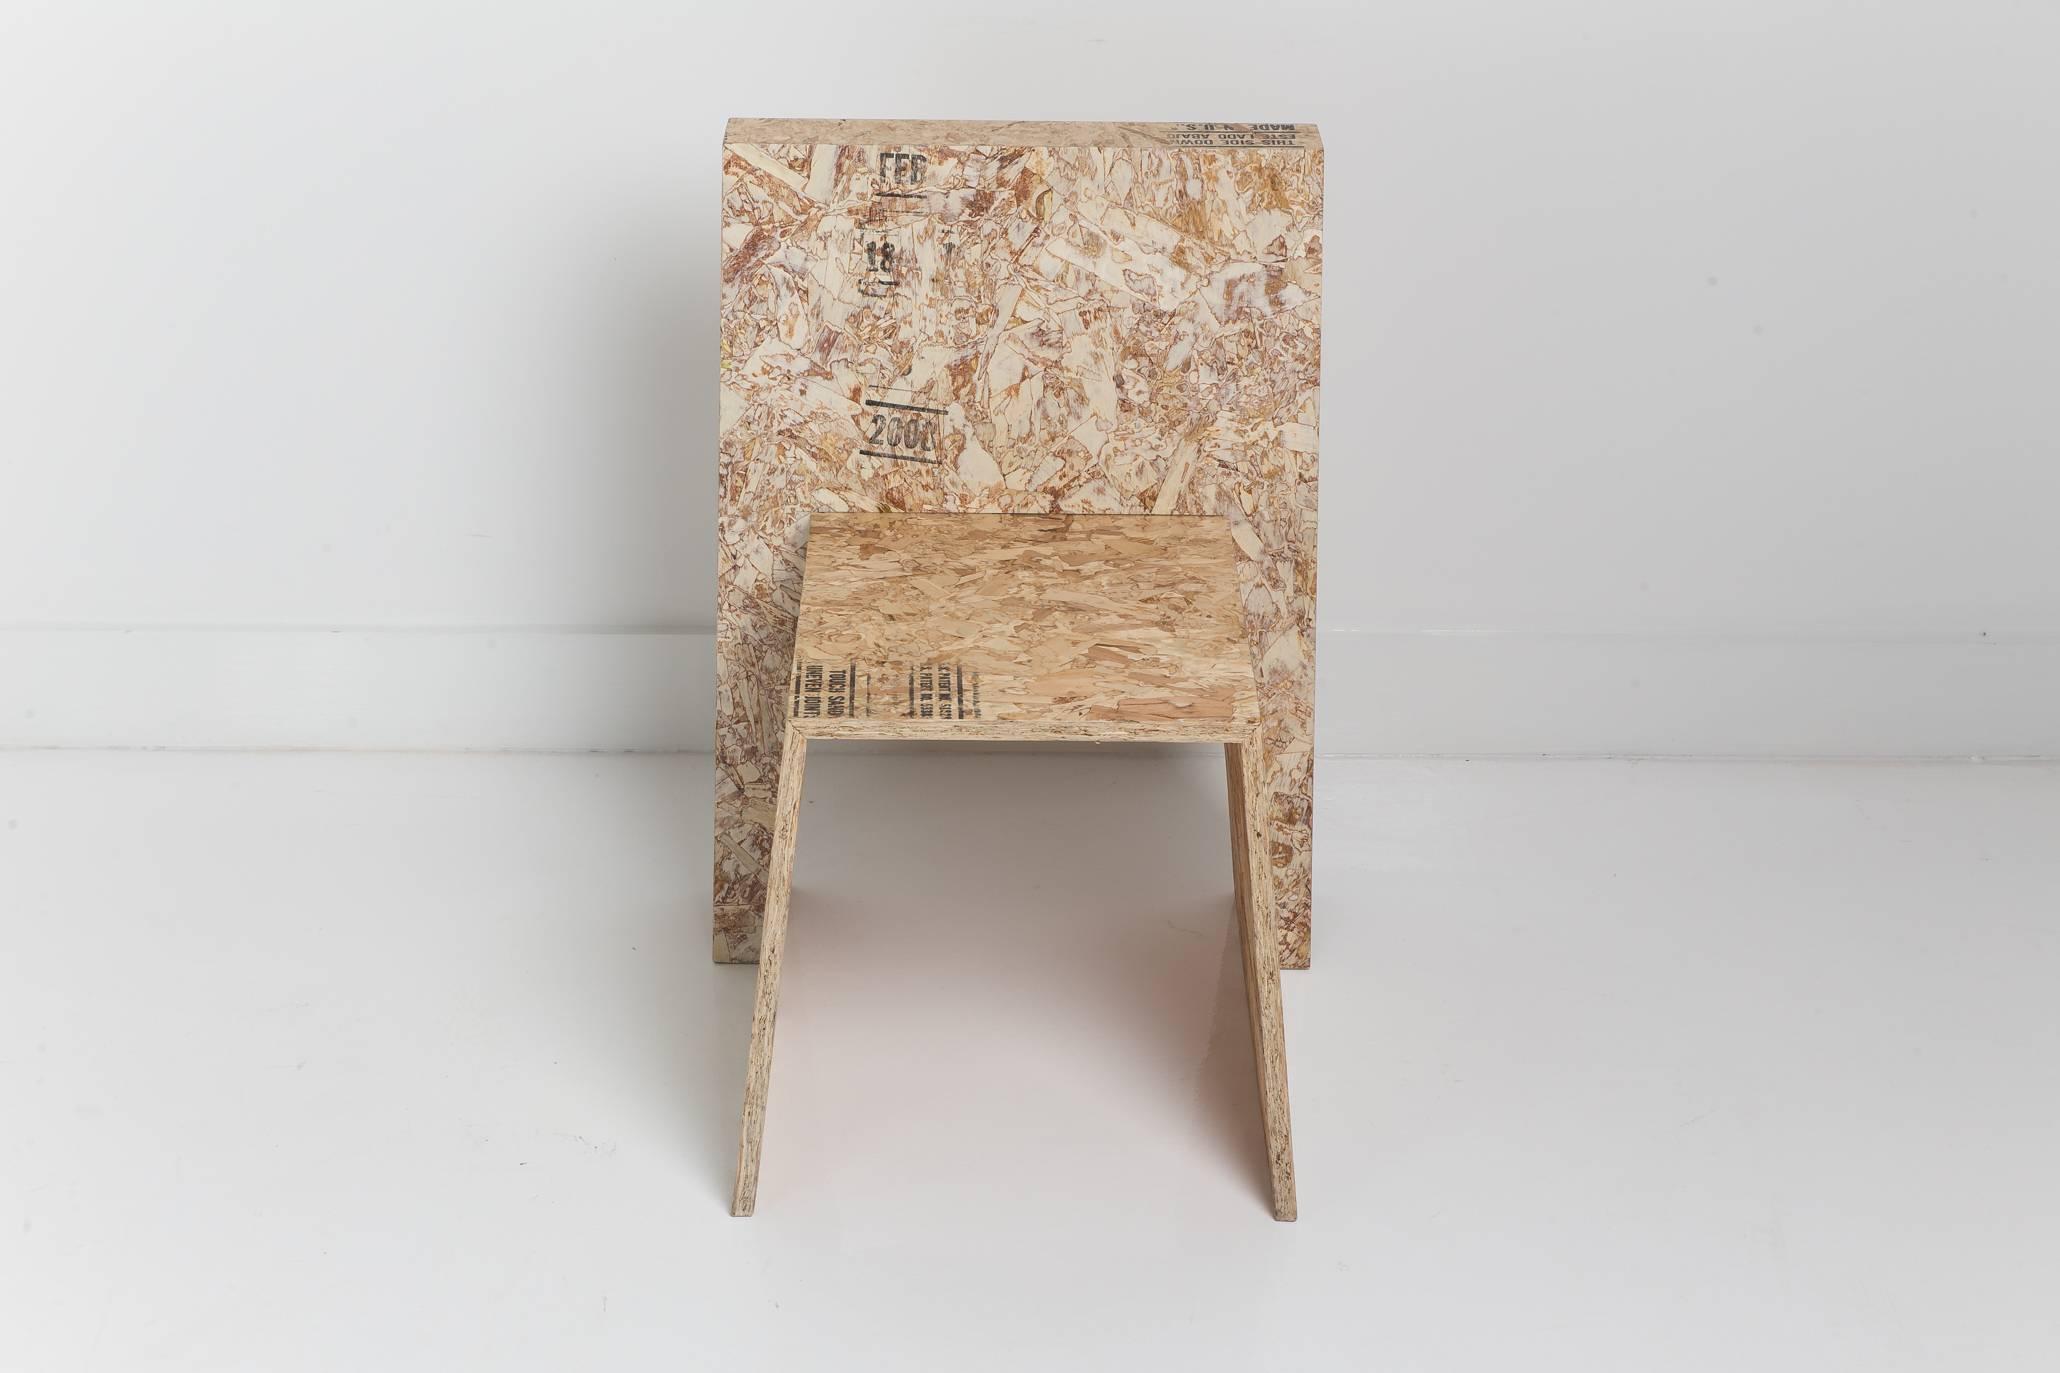 Todd Merrill Studio represents the unique seating by Chris Rucker, innovatively made from recycled construction materials. Challenging an everyday transient object , the Saw Horse Chair is made of OSB plywood. This unique piece is the first